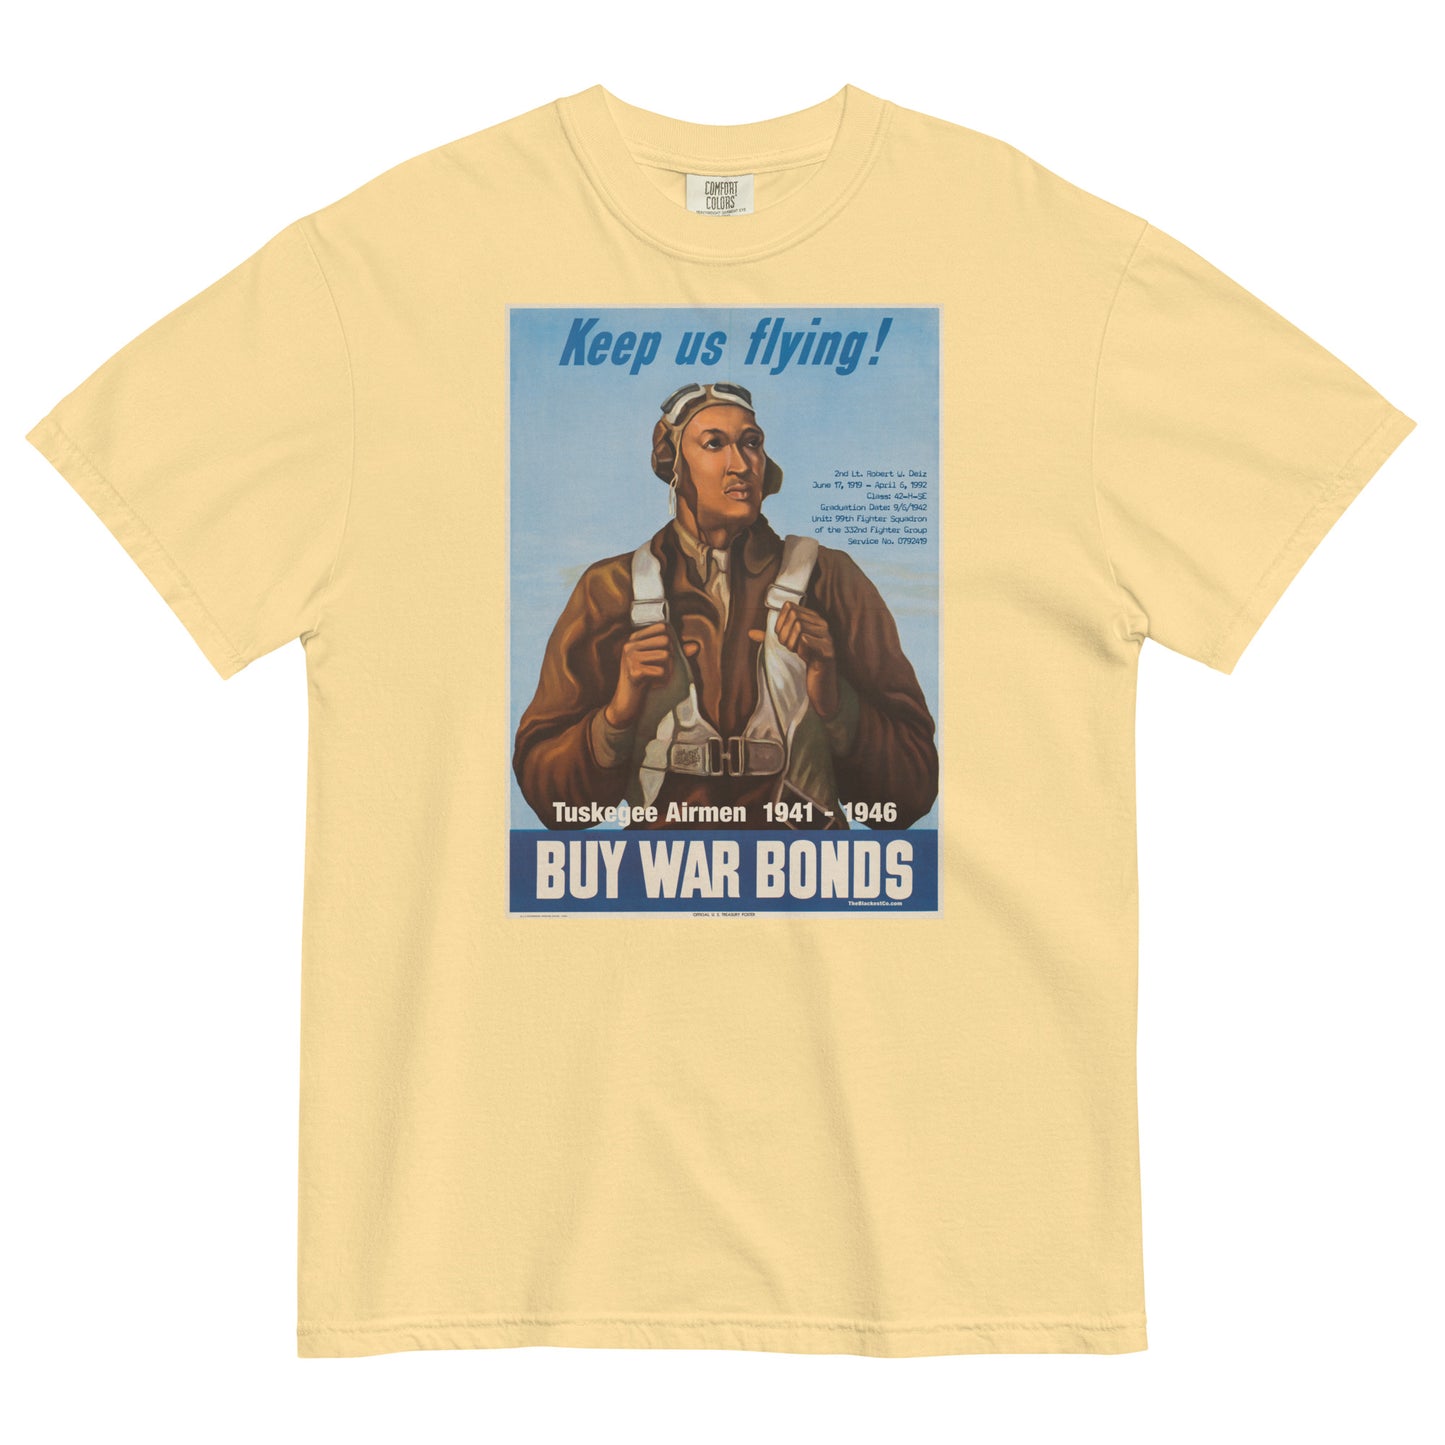 butter yellow t shirt with the image of an african american wwii pilot and tuskegee airmen written on it